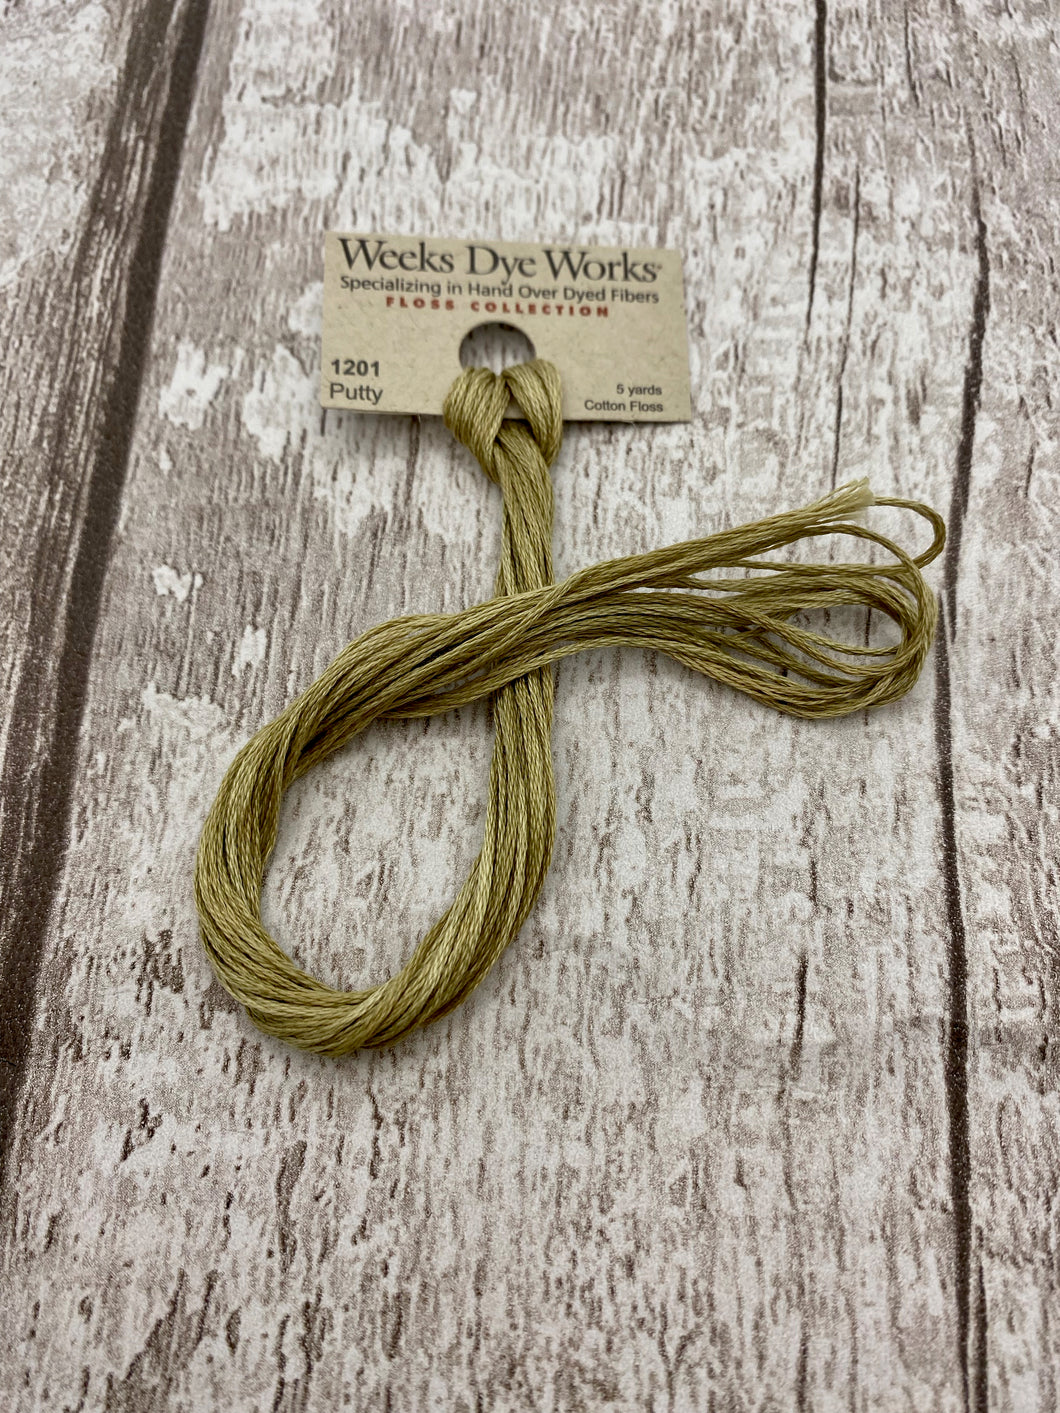 Putty (#1201) Weeks Dye Works 6-strand cotton floss